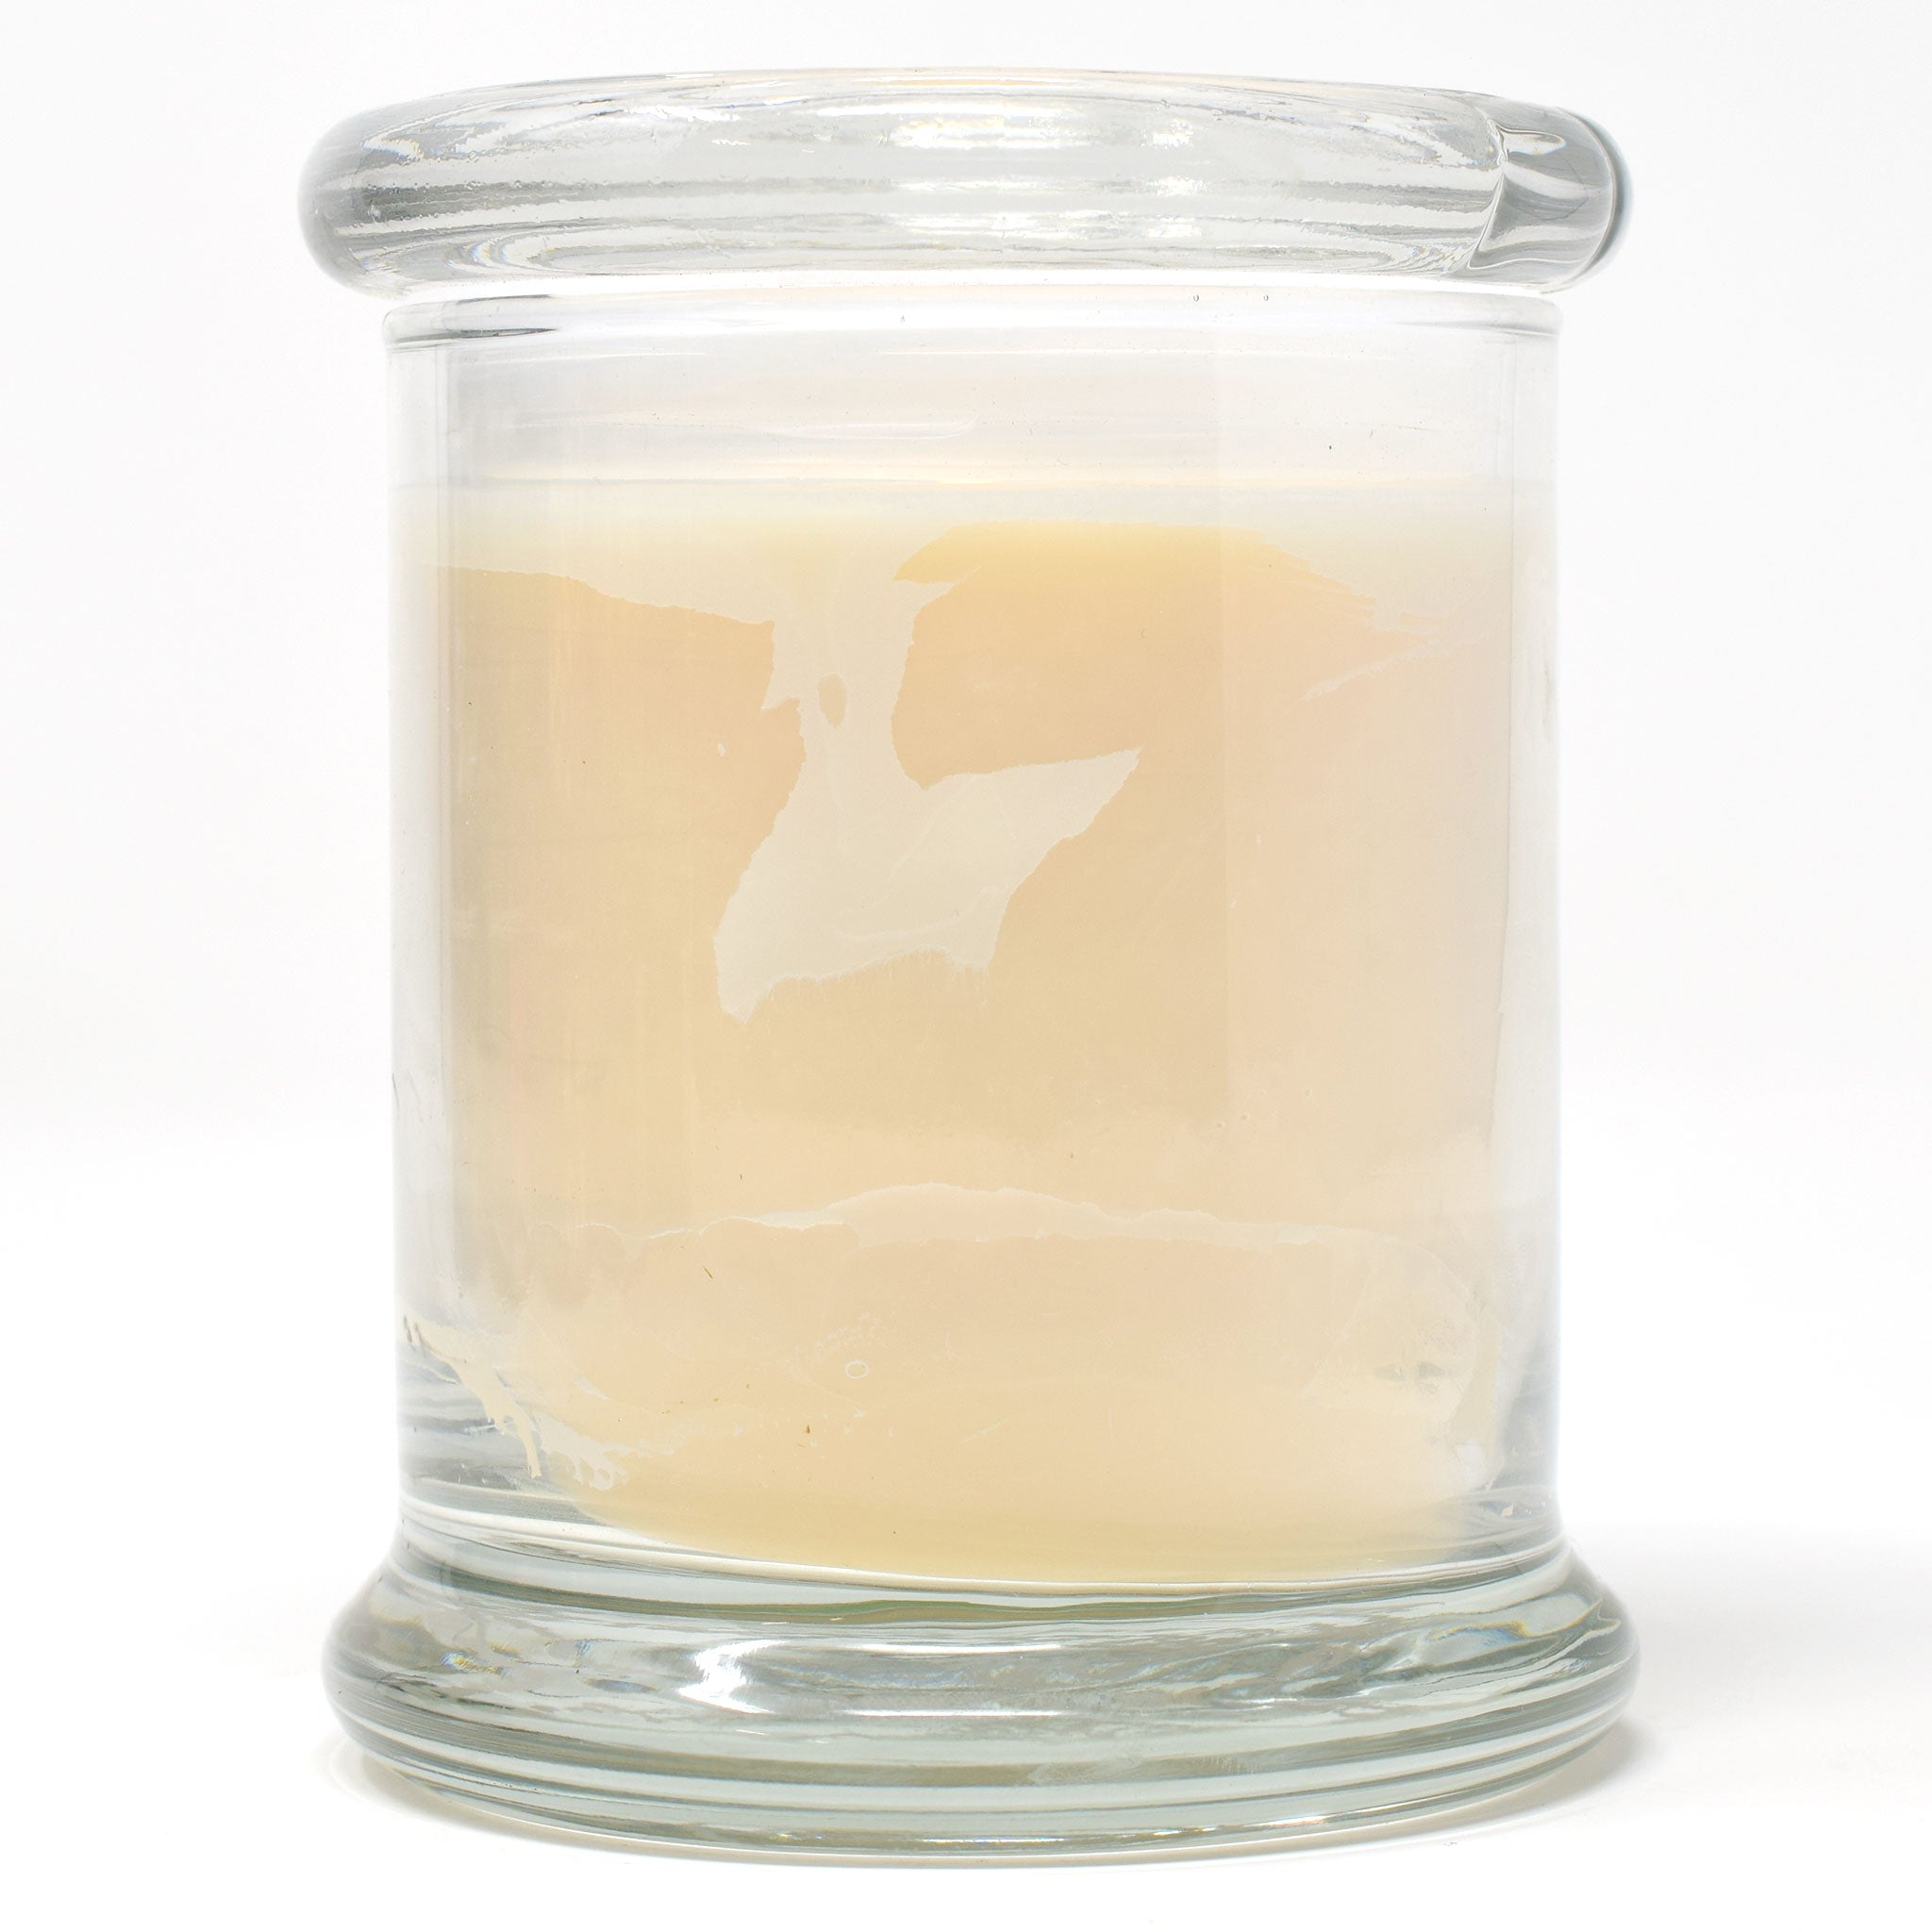 Fir Needle Essential Oil, 9oz Soy Candle Jar - Candeo Candle